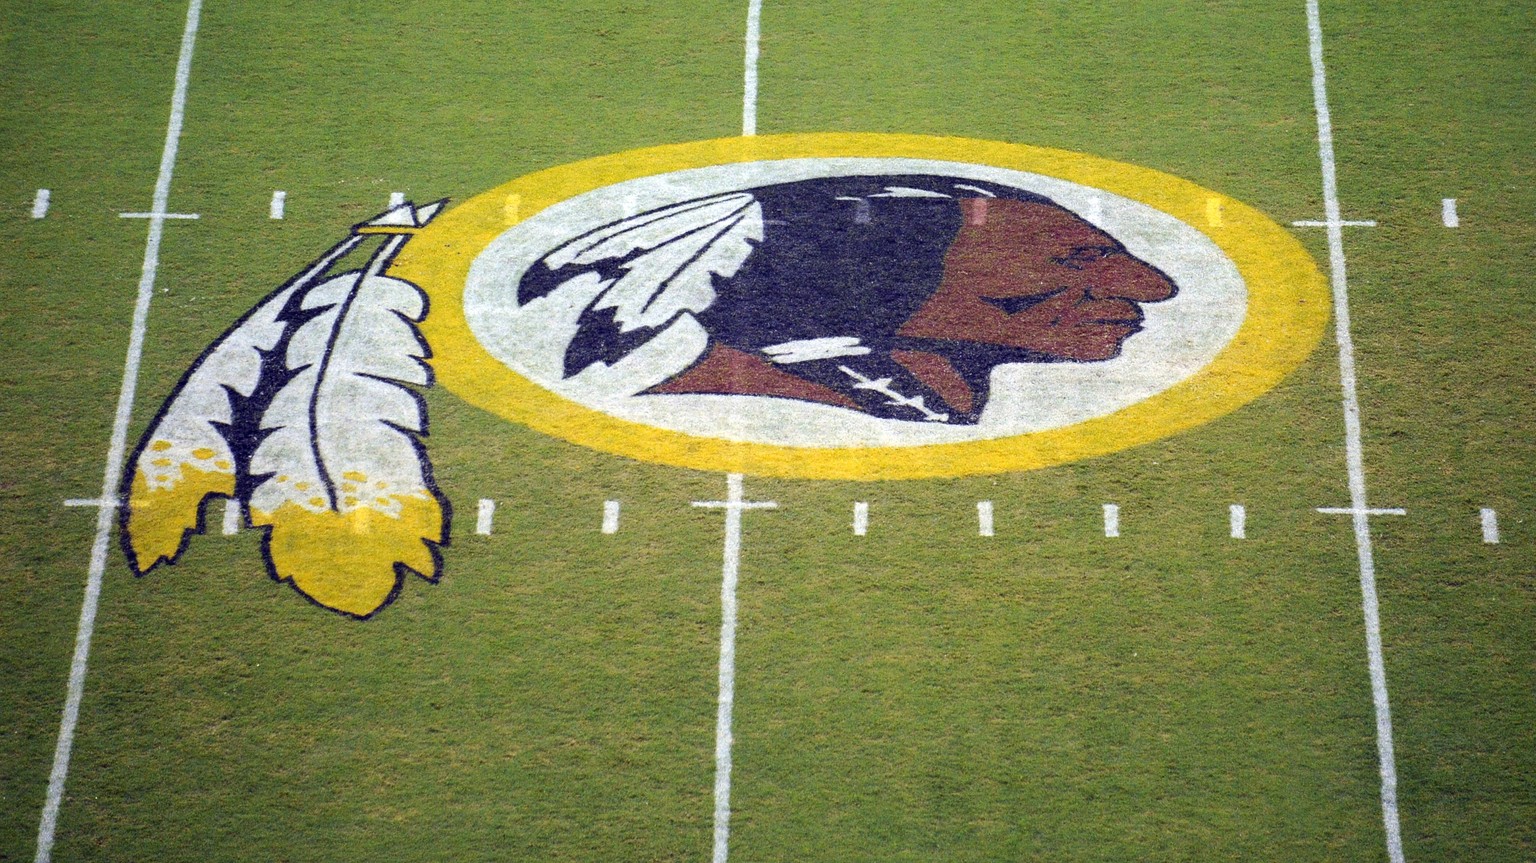 FILE - In this Aug. 28, 2009 file photo, the Washington Redskins logo is shown on the field before the start of a preseason NFL football game against the New England Patriots in Landover, Md. The Wash ...